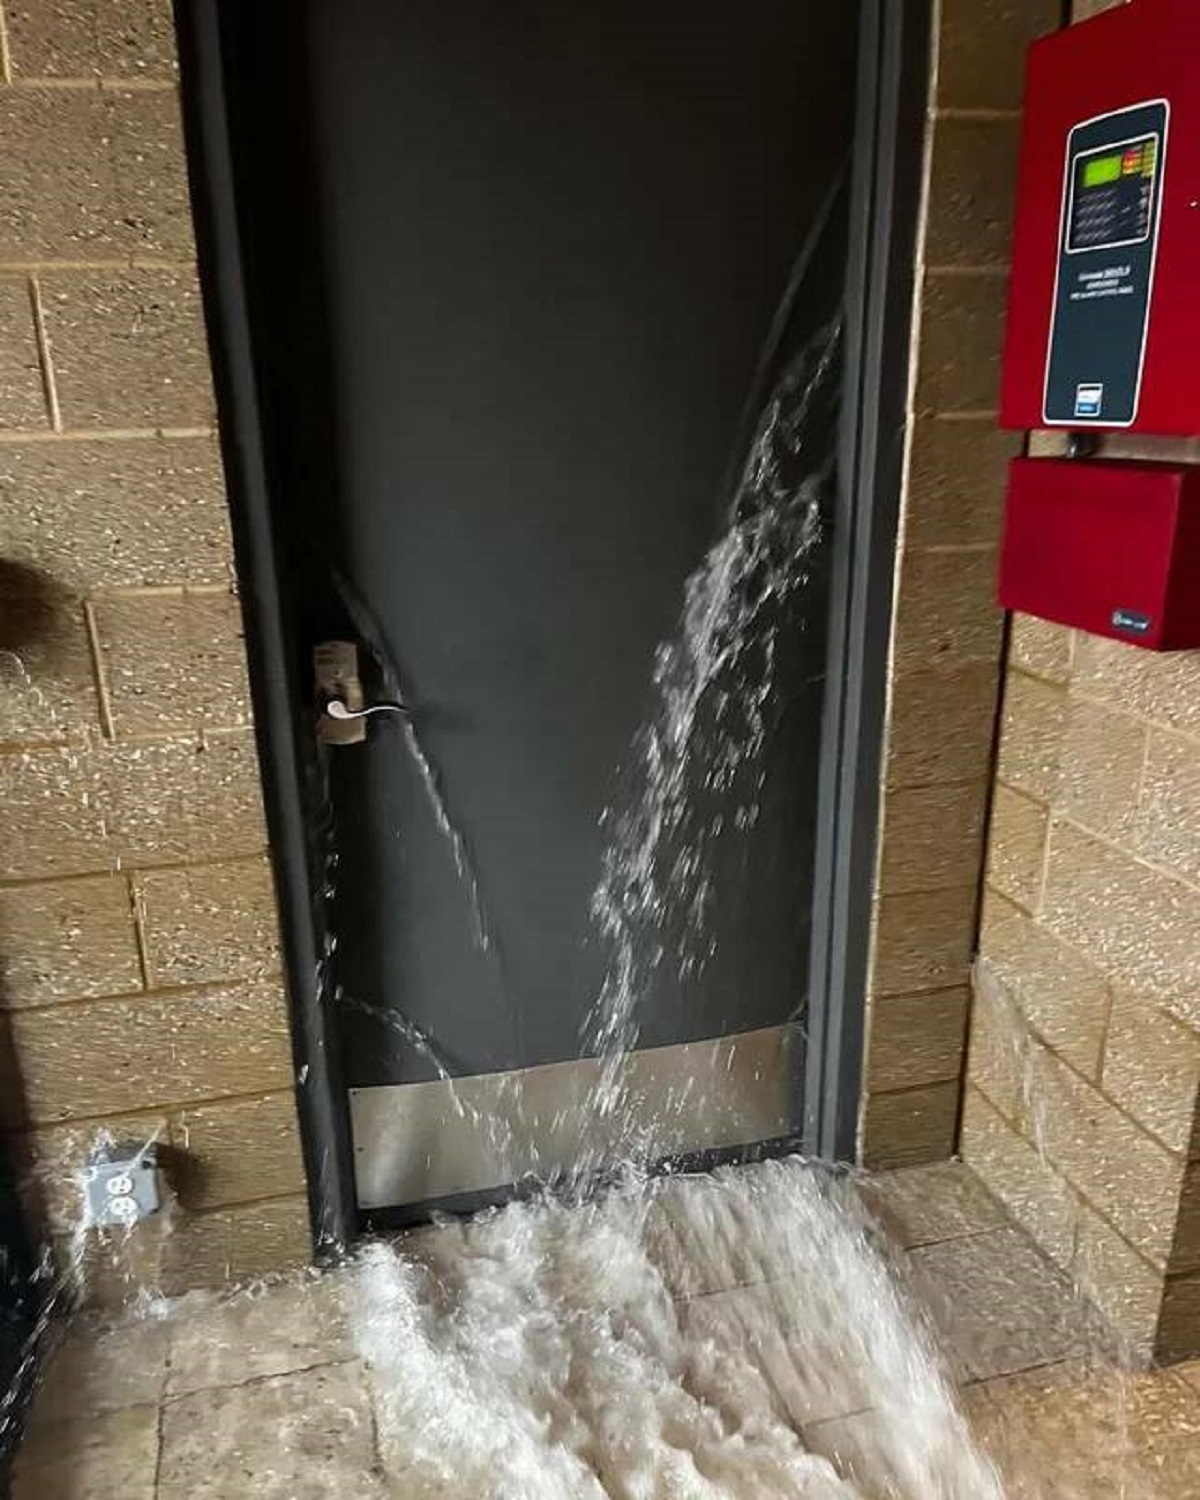 "There is a 7ft wall of water from a burst 5” pipe, behind this inward swinging door."